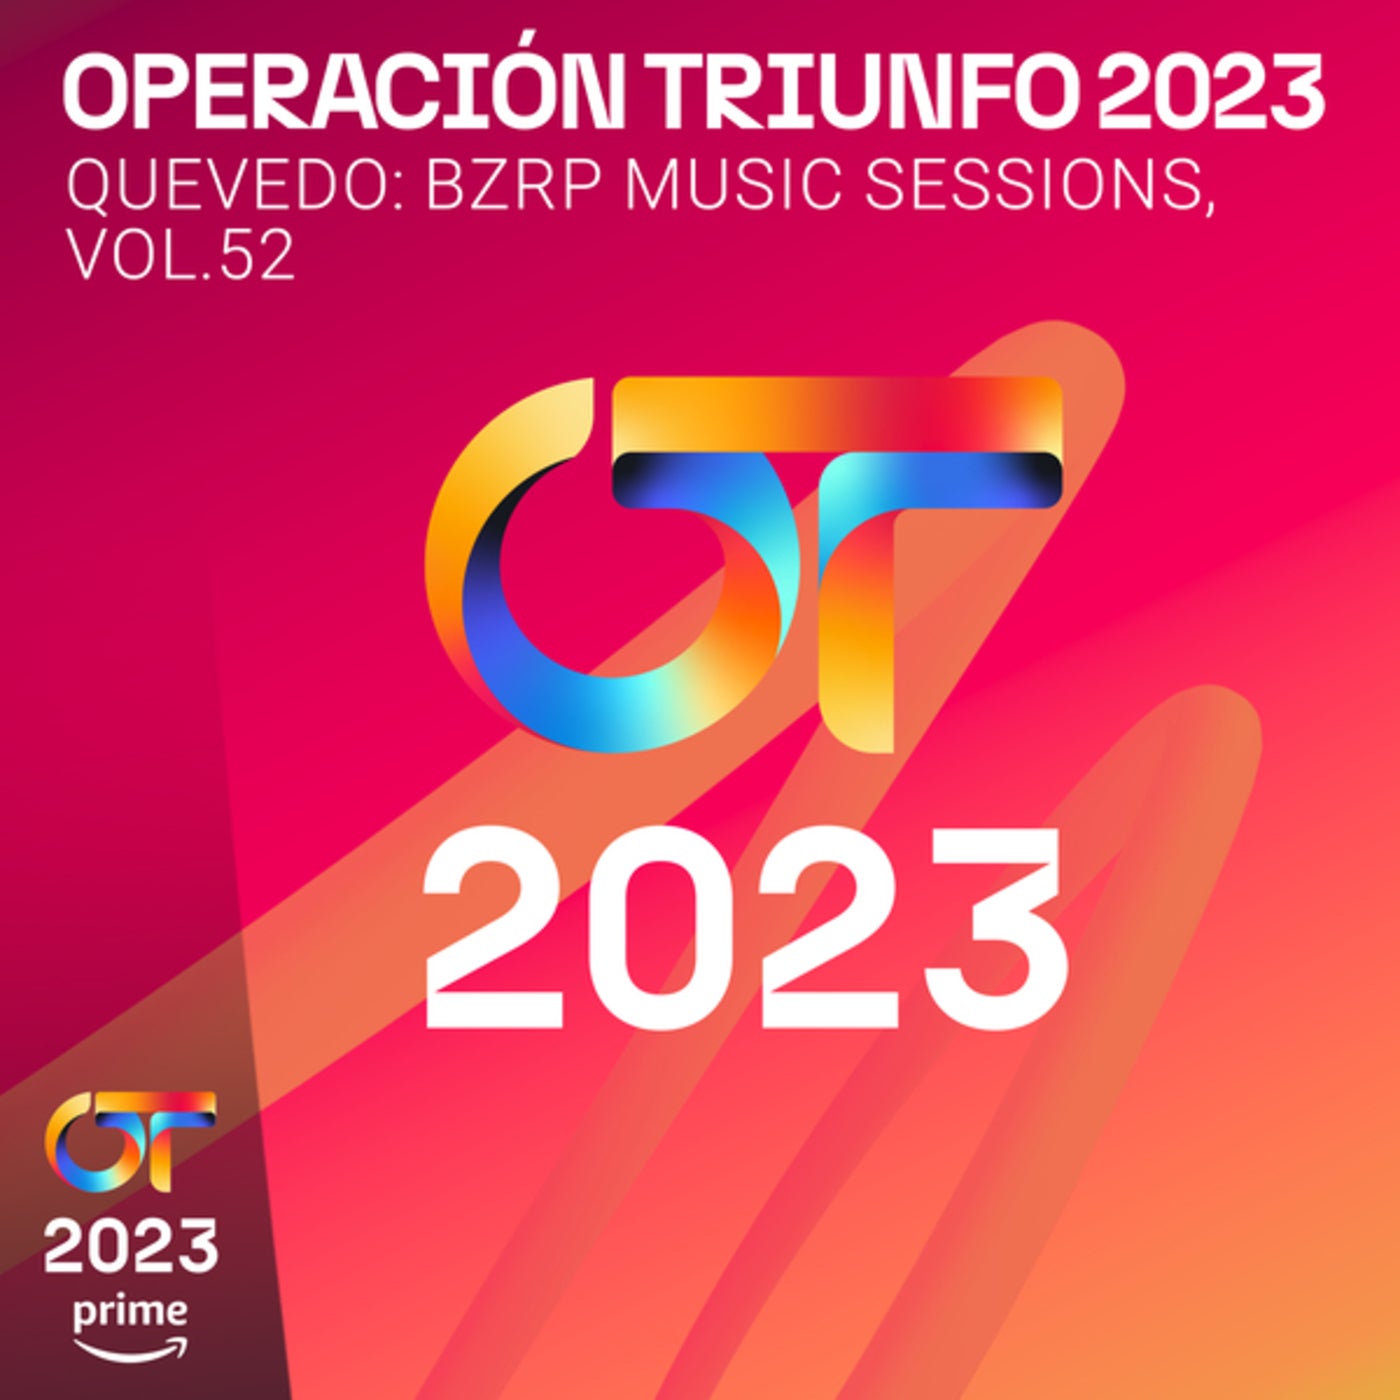 Quevedo: Bzrp Music Sessions, Vol. 52 by Operación Triunfo 2023 on  Beatsource